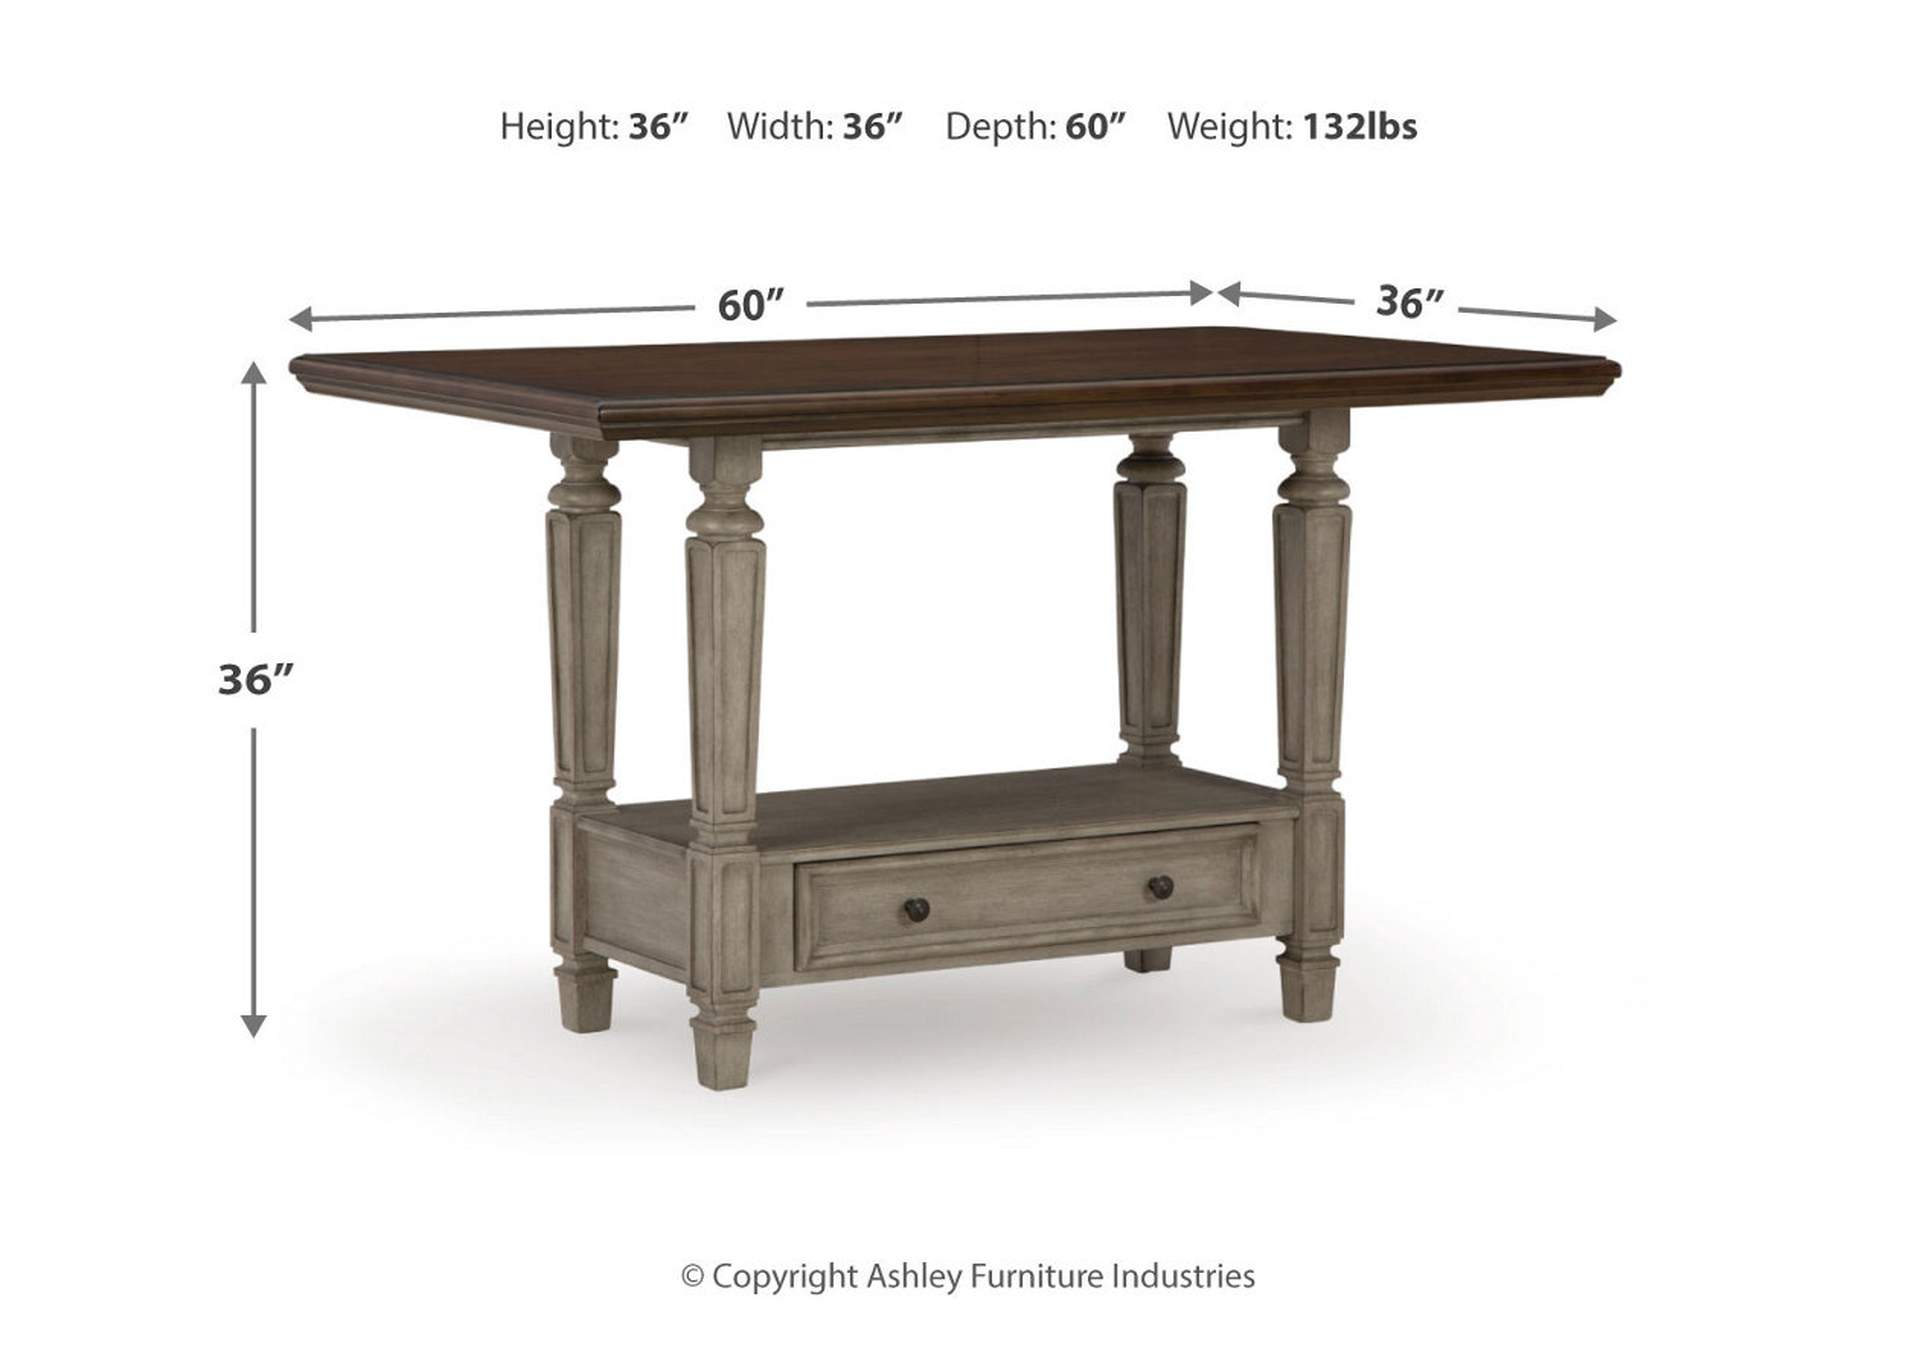 Lodenbay Counter Height Dining Table and 6 Barstools with Storage,Signature Design By Ashley